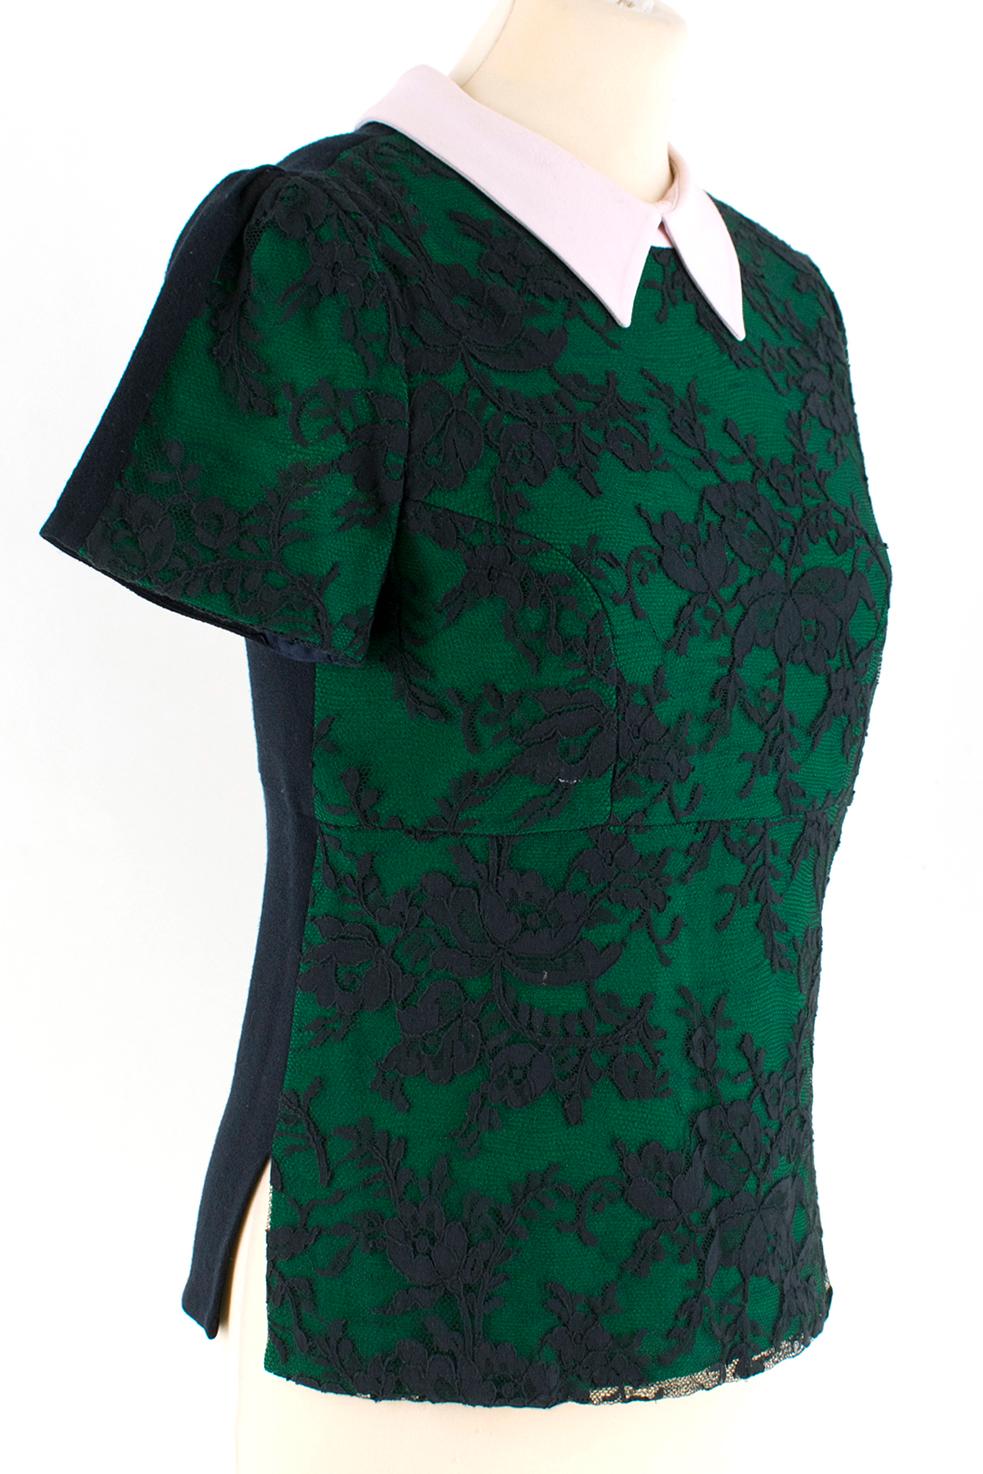 Erdem Navy & Green Wool Embroidered Top W/ Baby Pink Collar

- navy & green wool top
- nave lace embellishment to the front 
- baby pink collar
- short sleeve
- contrasting metallic zip closure to the back

Please note, these items are pre-owned and